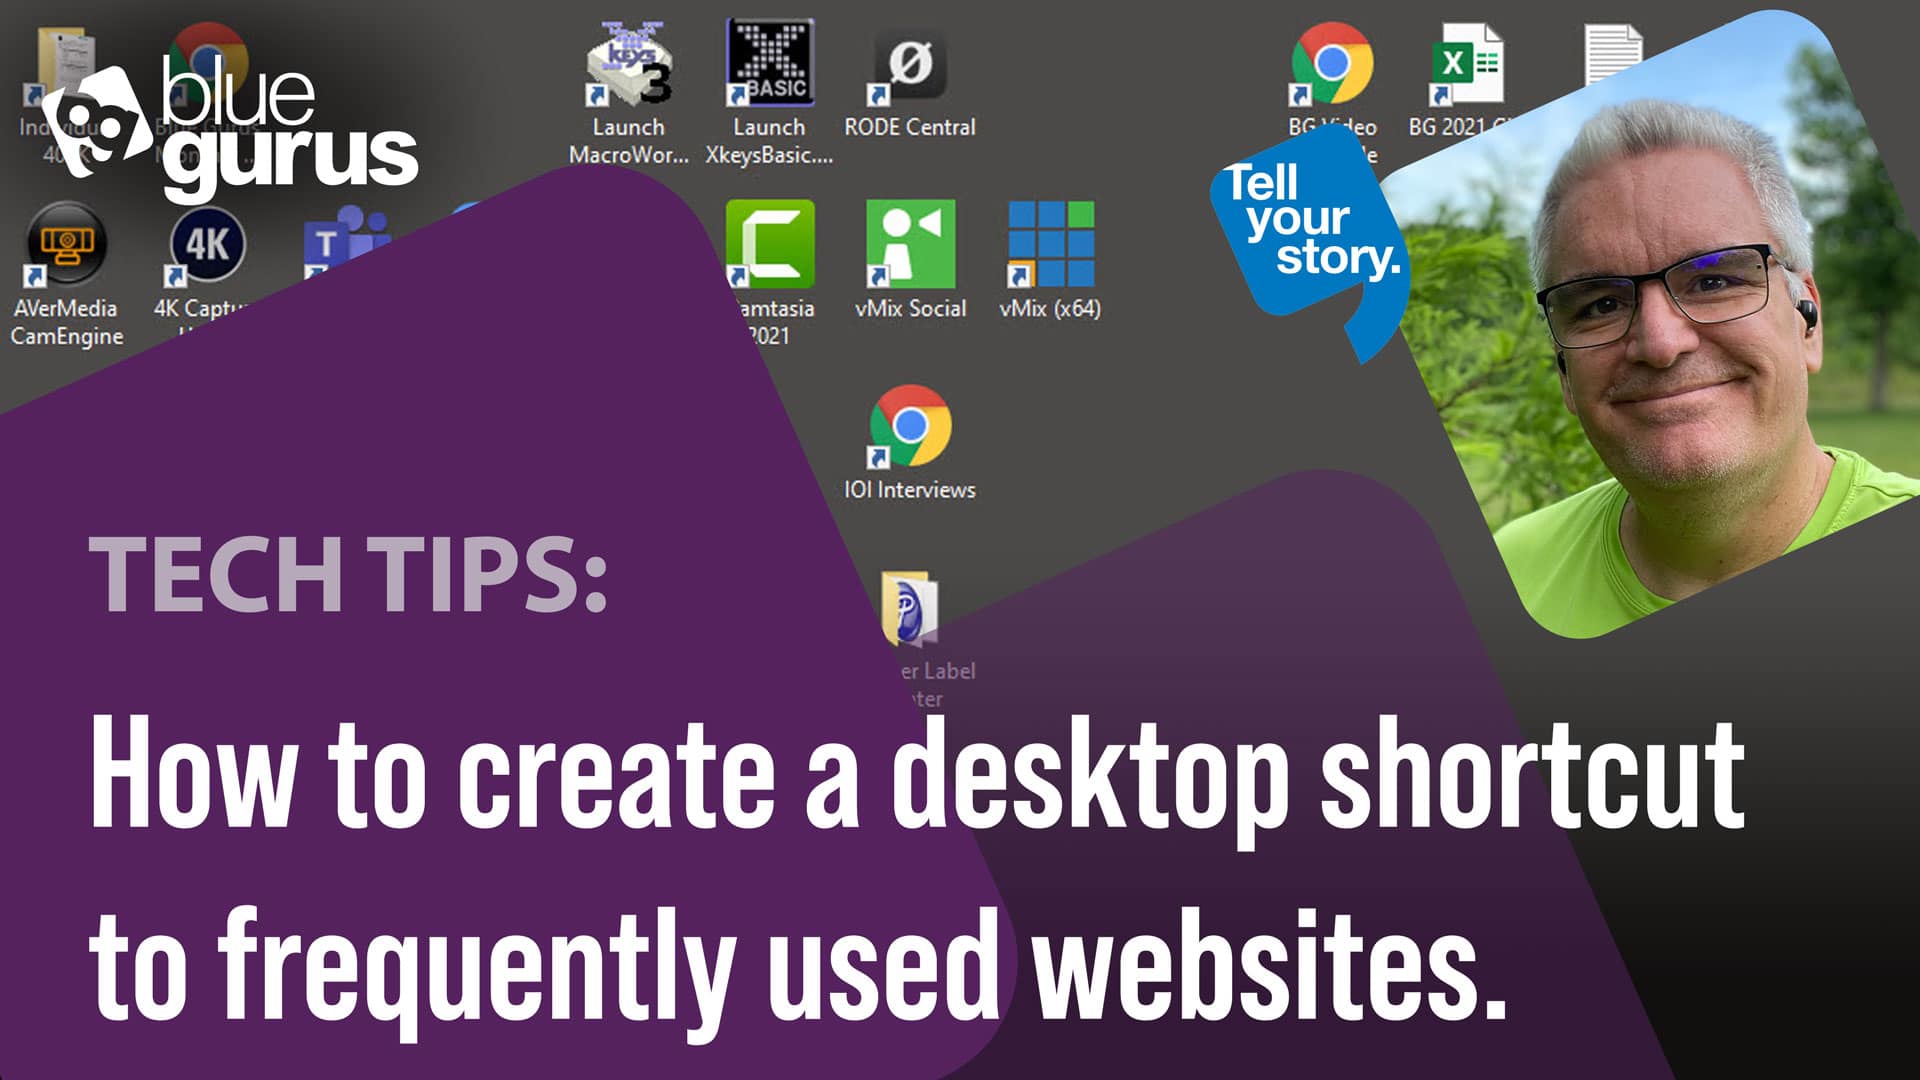 How to create a desktop shortcut to a web page.